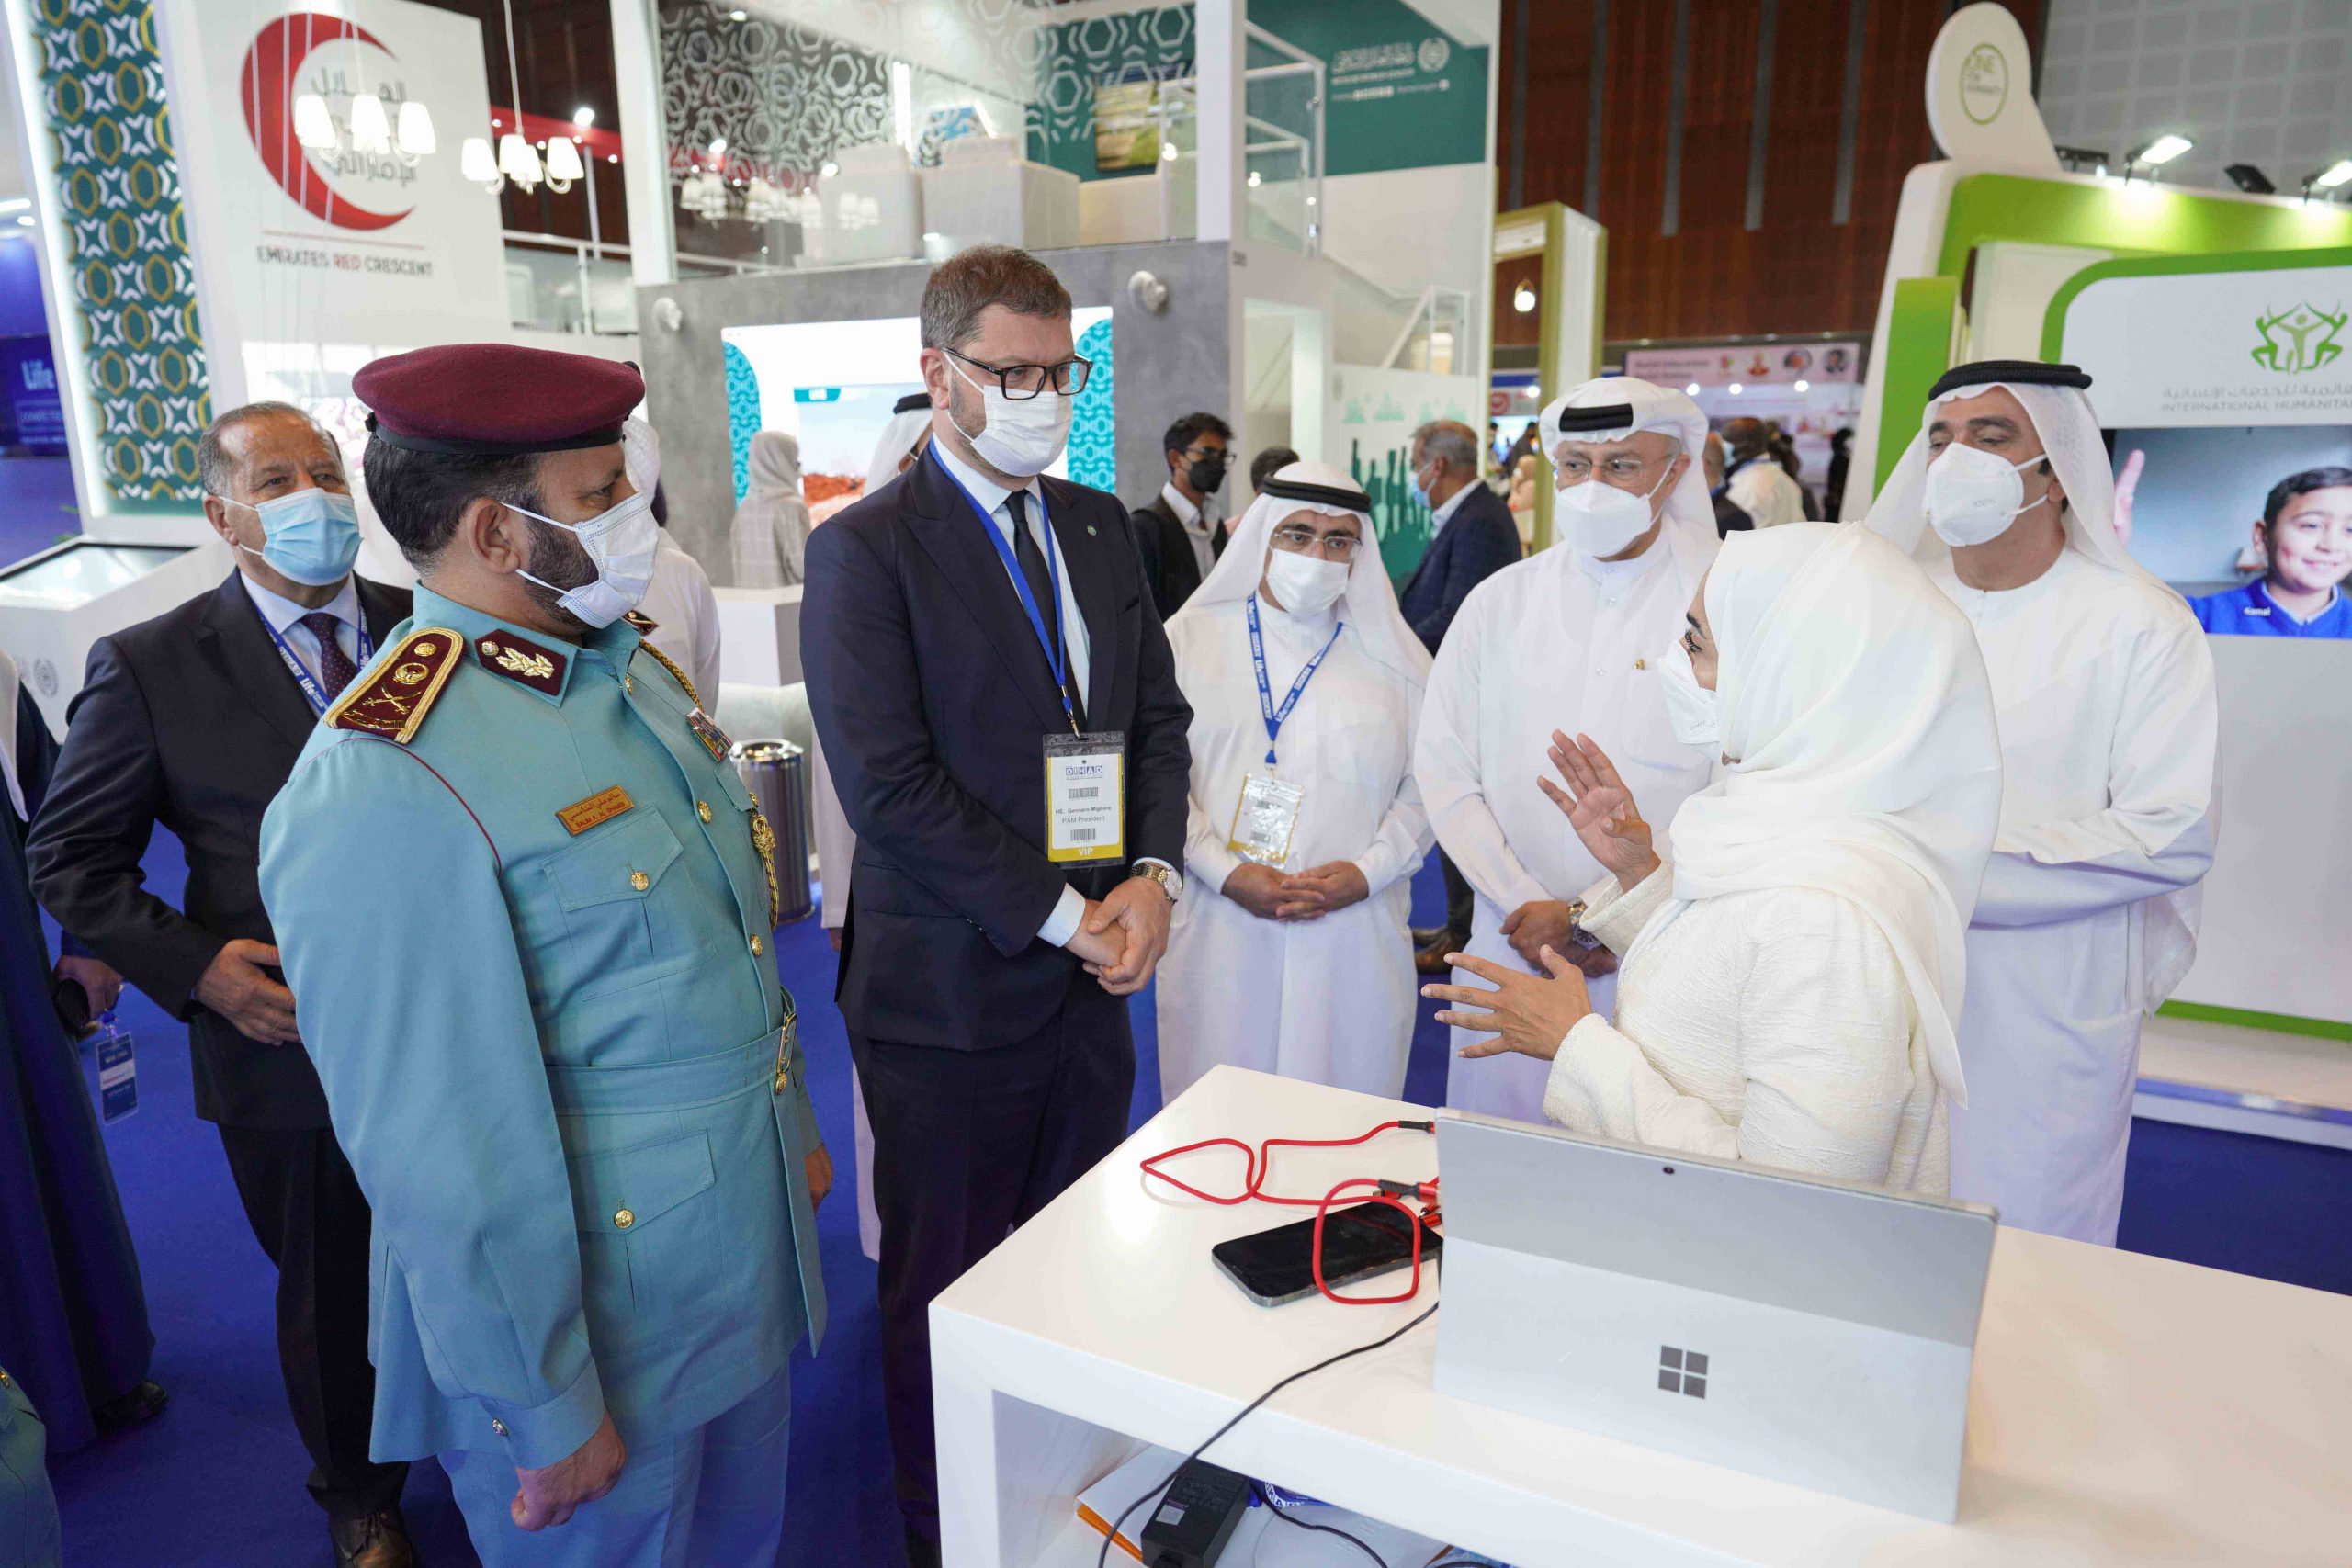 DIHAD launches 4 humanitarian initiatives from the UAE to the world